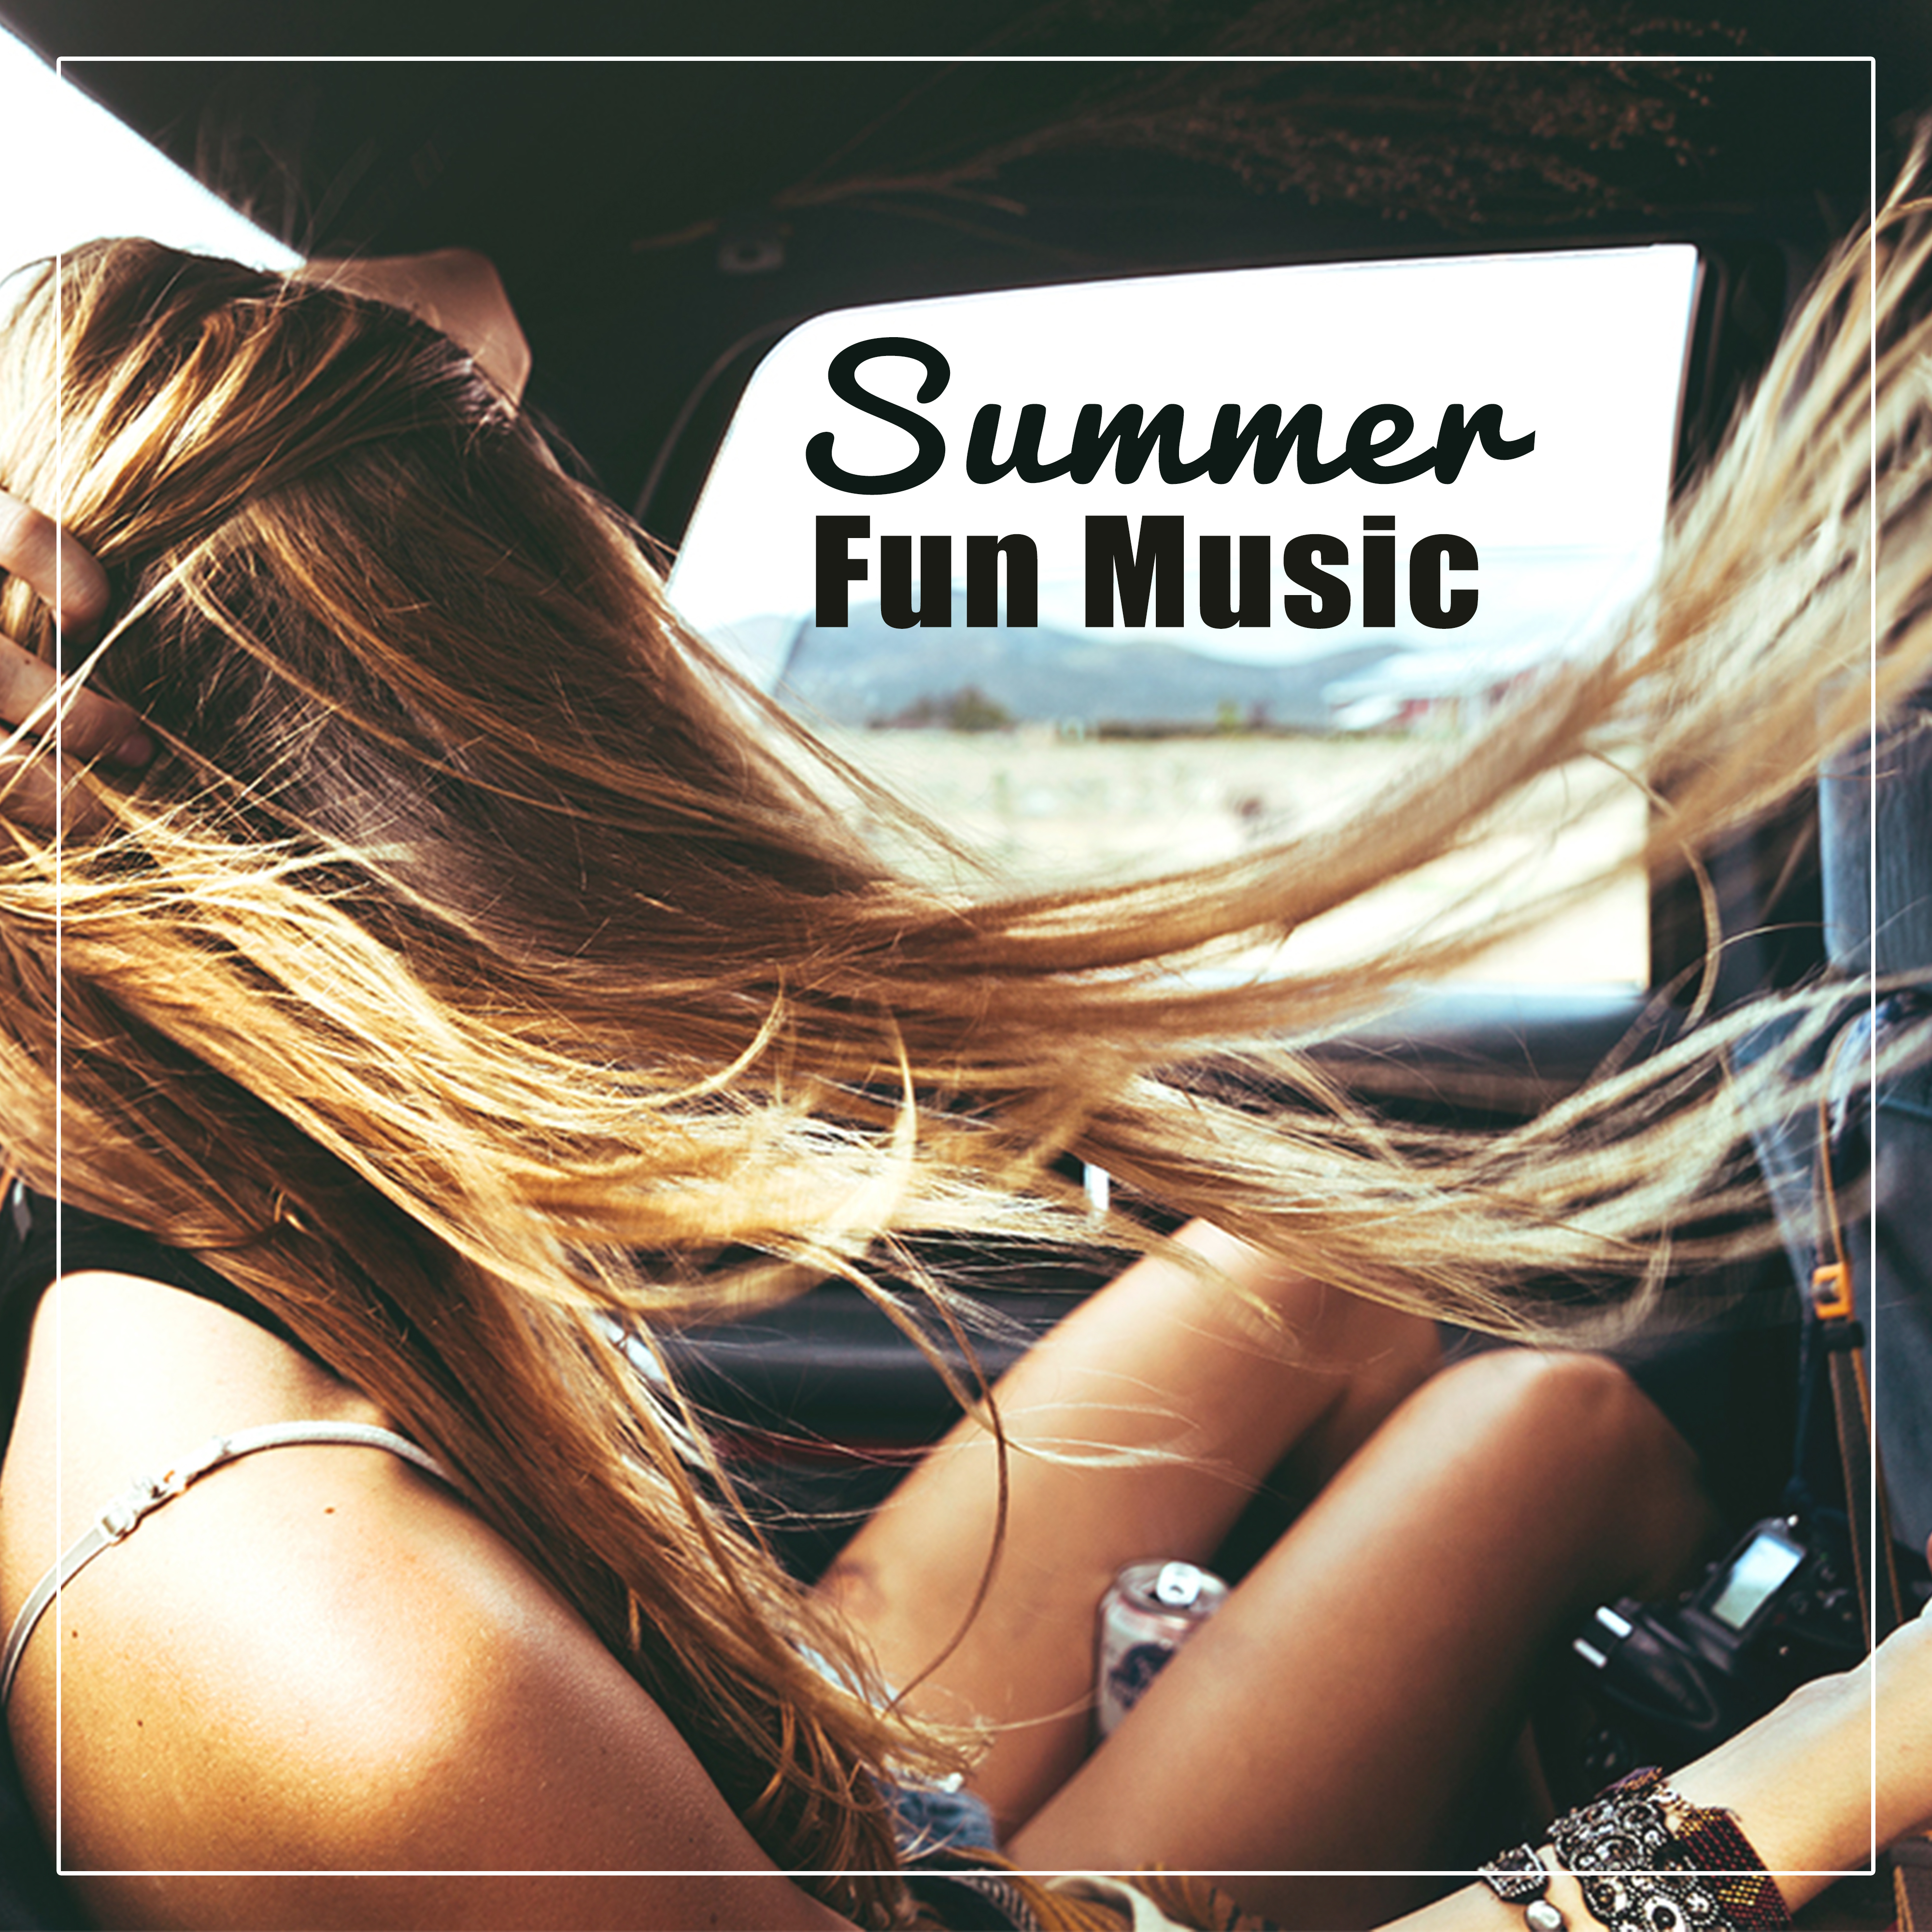 Summer Fun Music  Tropical Island, Beach Time, Free Time, Sounds to Have Fun